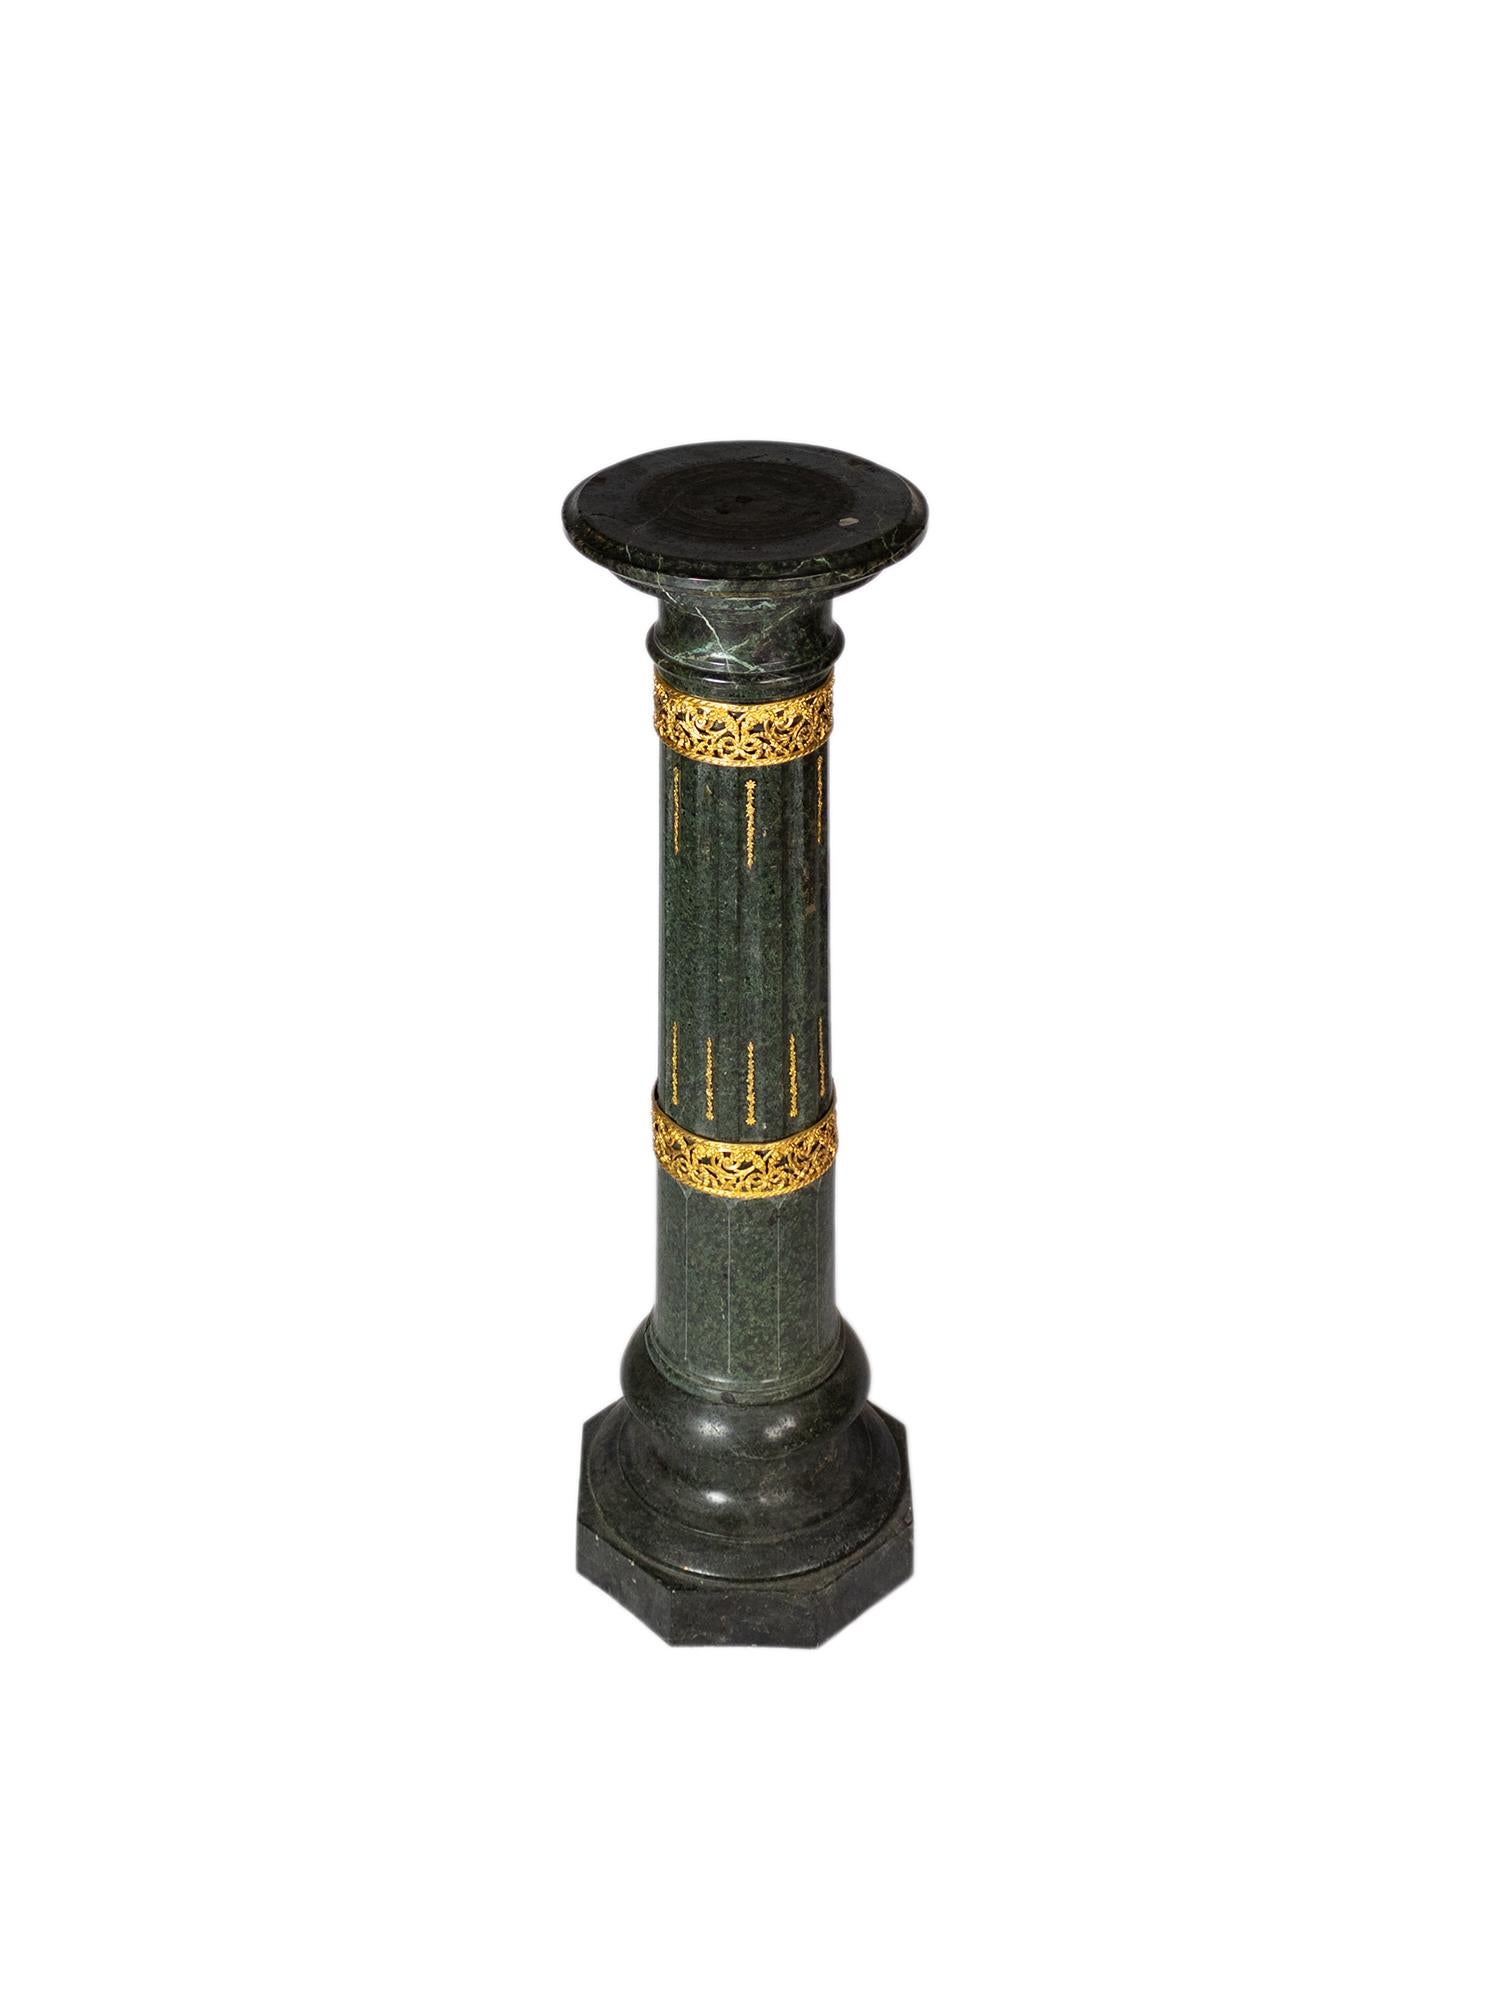 A french neoclassical 19th century alpine green marble pedestal column with gilded bronze decoration.
